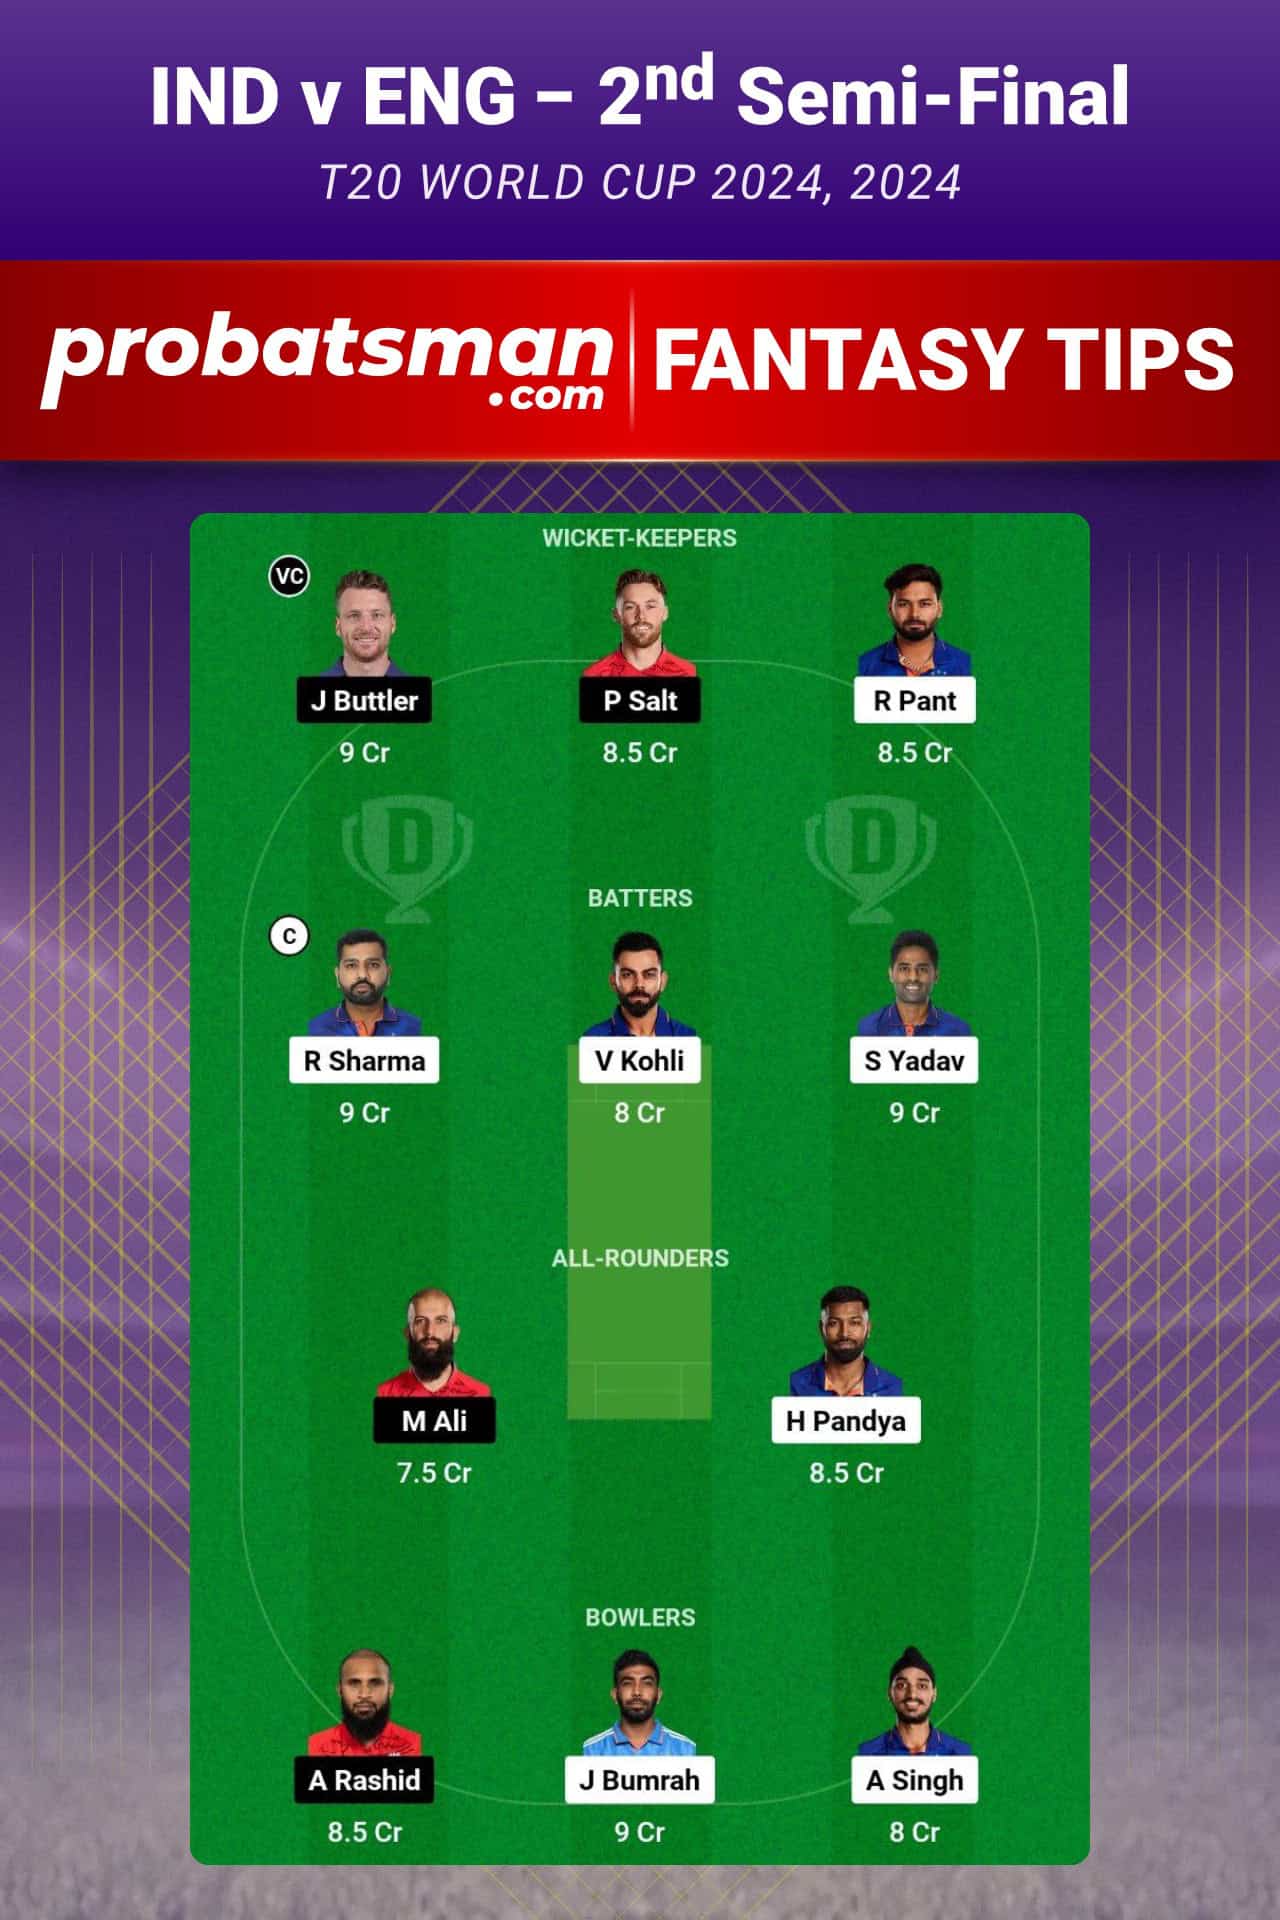 IND vs ENG Dream11 Prediction For 2nd Semi-Final of T20 World Cup 2024